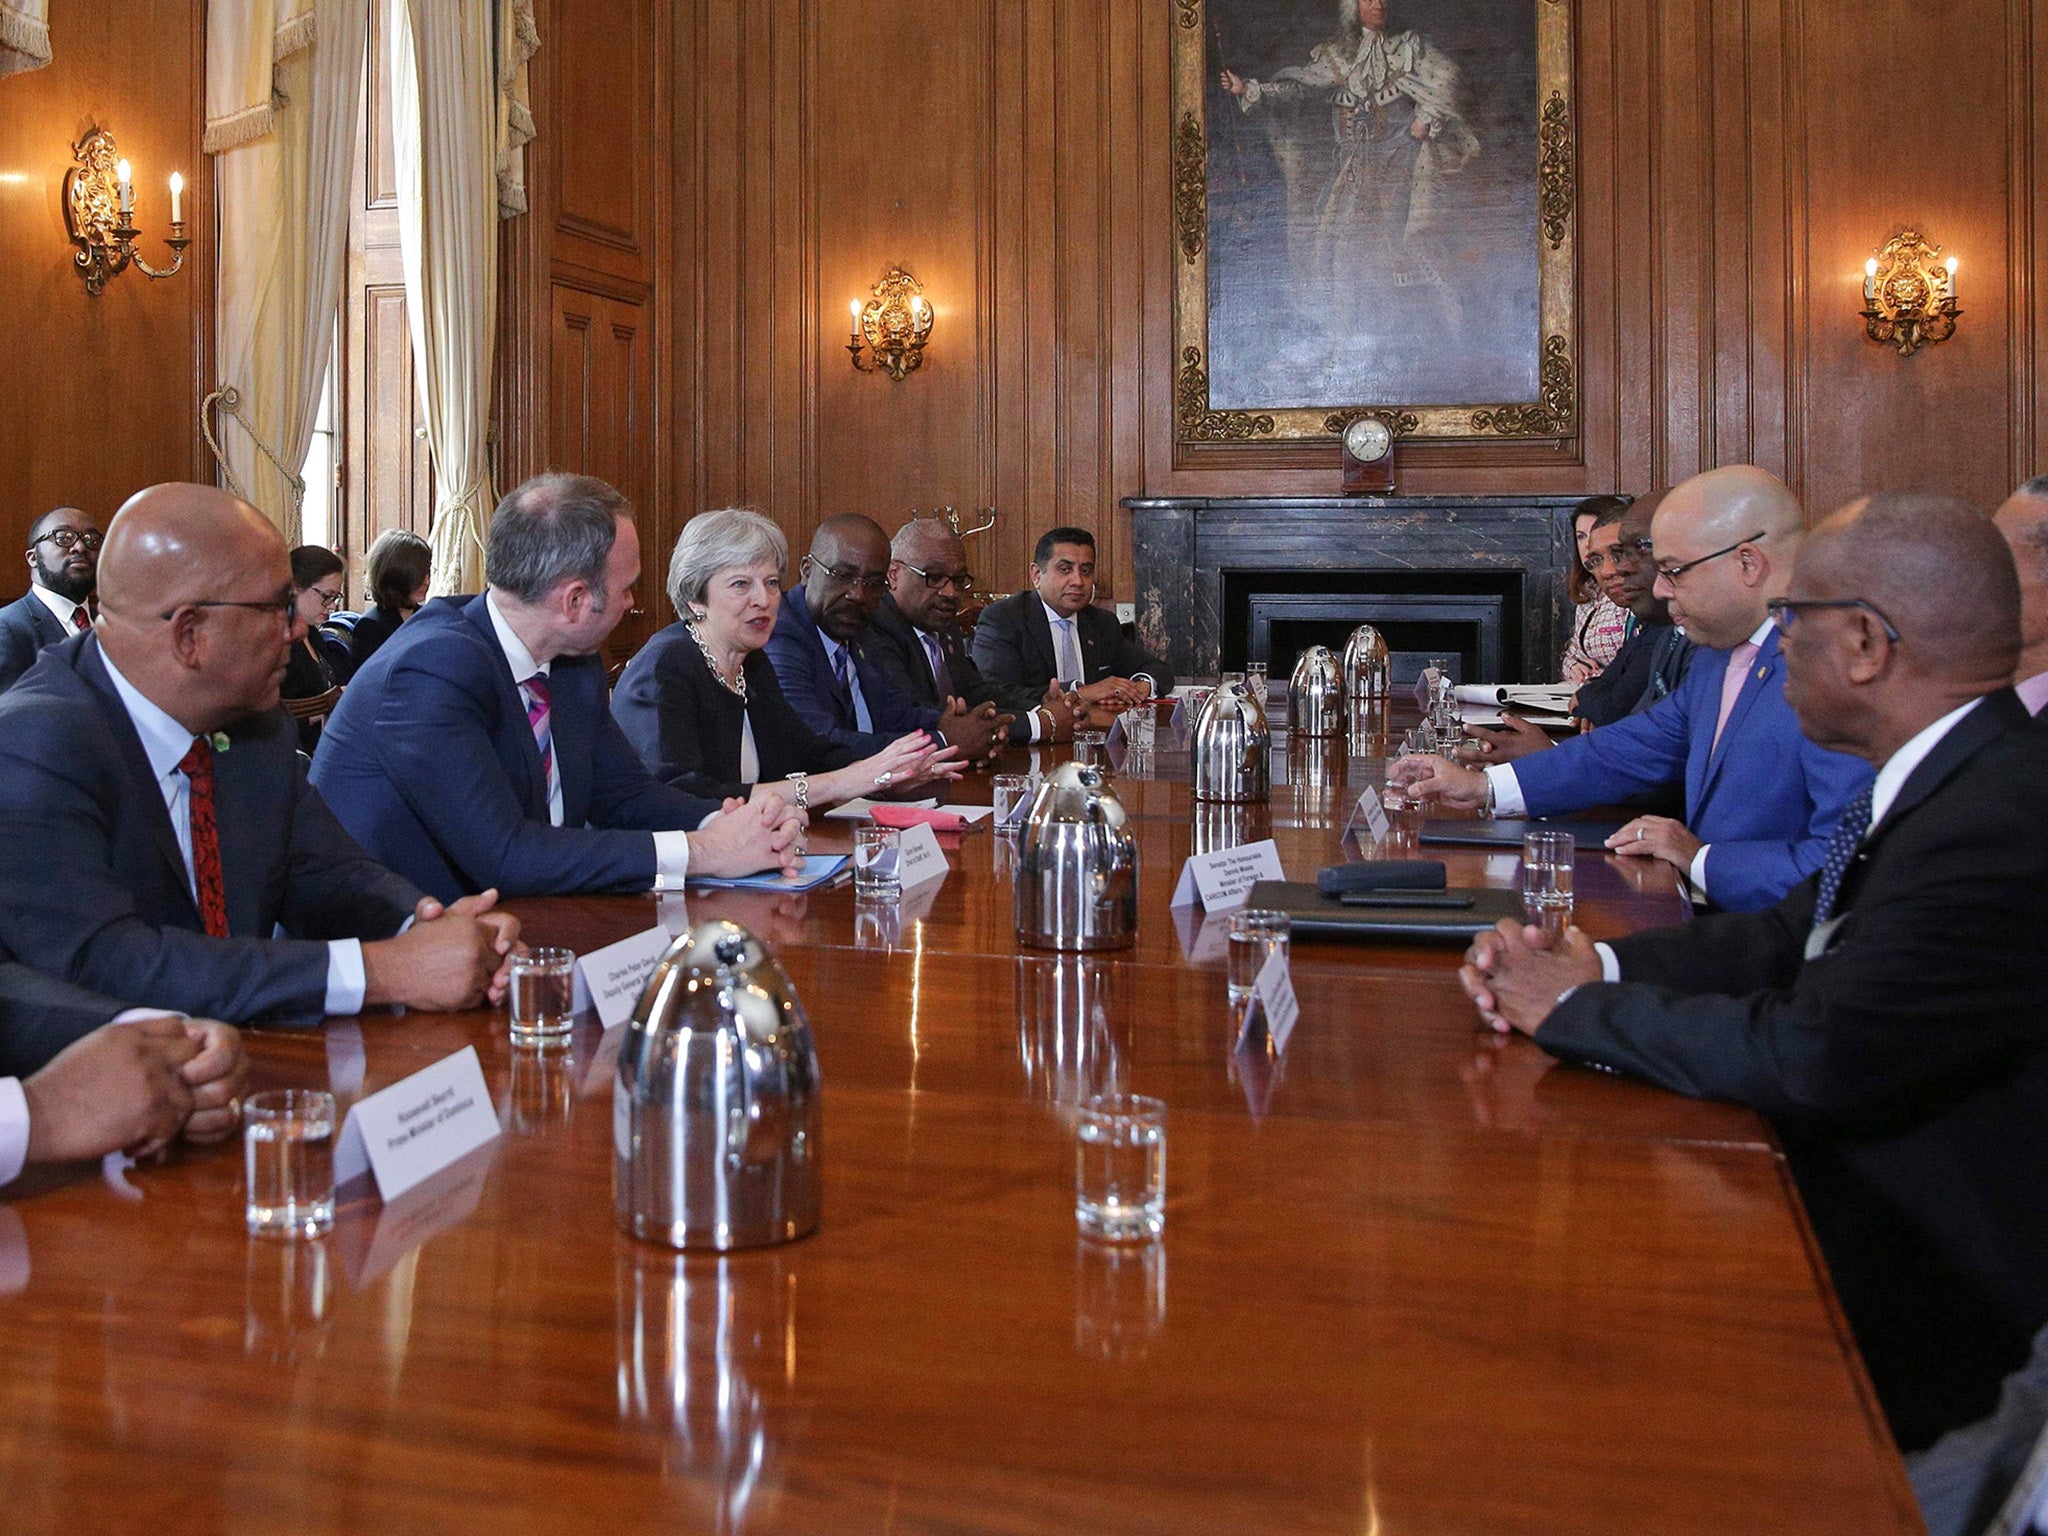 Prime Minister Theresa May hosts a meeting with leaders and representatives of Caribbean countries, at 10 Downing Street on the sidelines of the Commonwealth Heads of Government meeting.